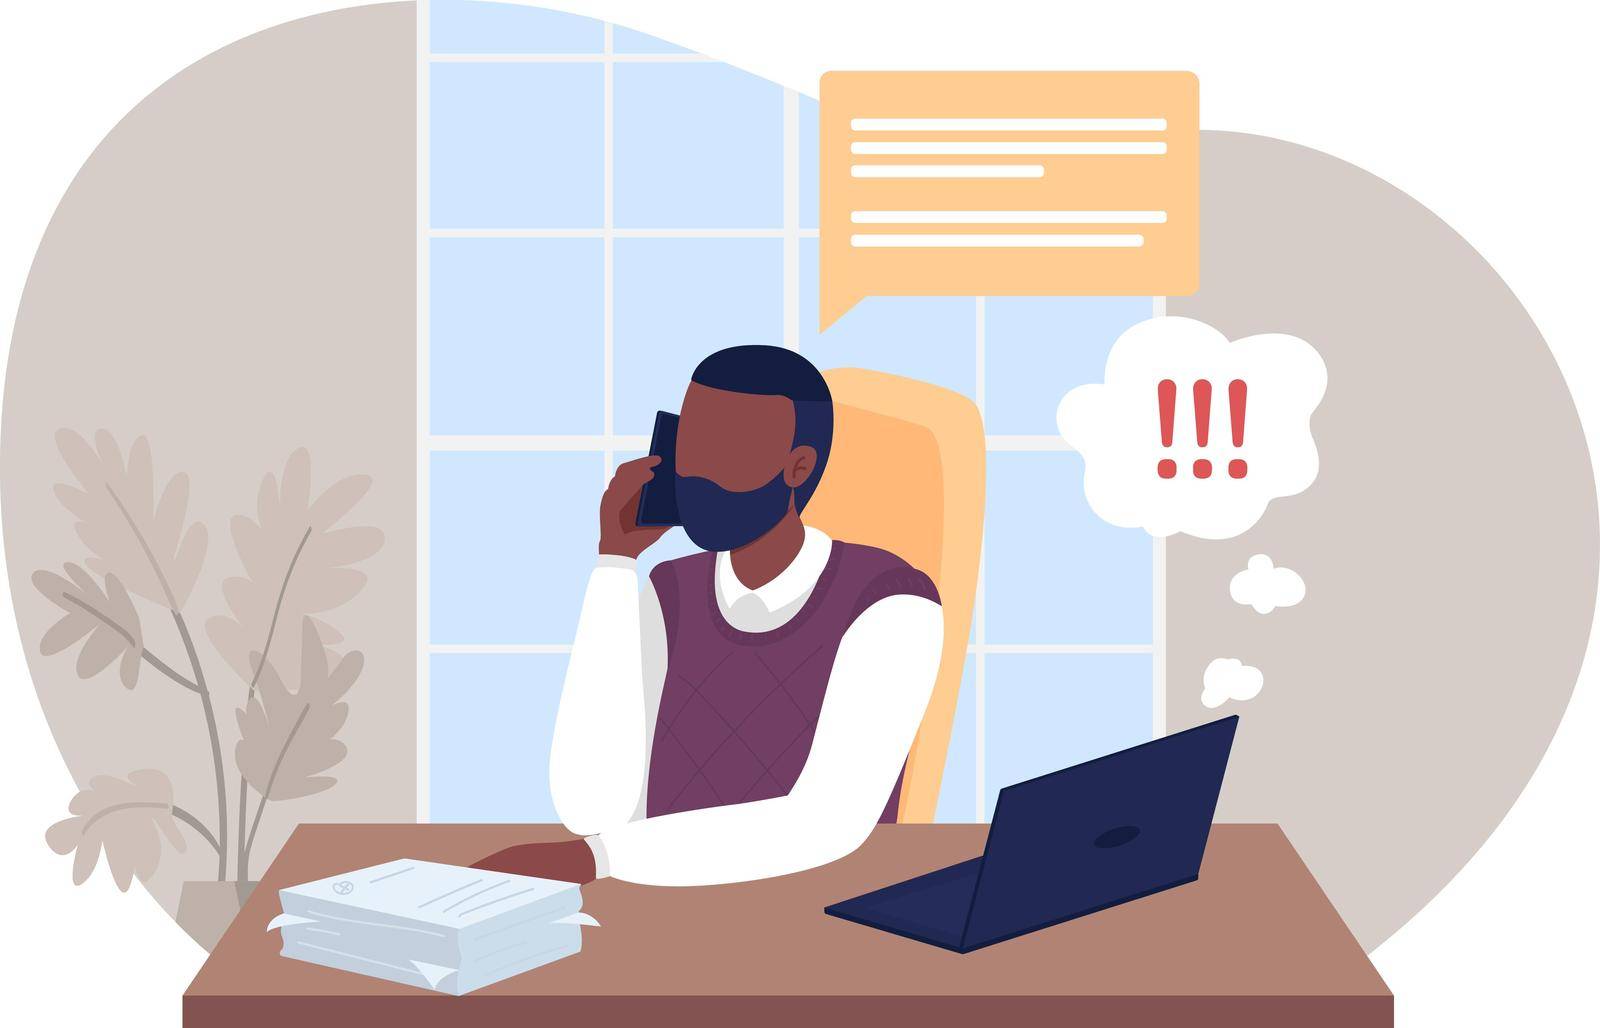 Distraction from work 2D vector isolated illustration. Man talking on phone, ignoring urgent project. Depressed flat character on cartoon background. Freelancer in home office colourful scene